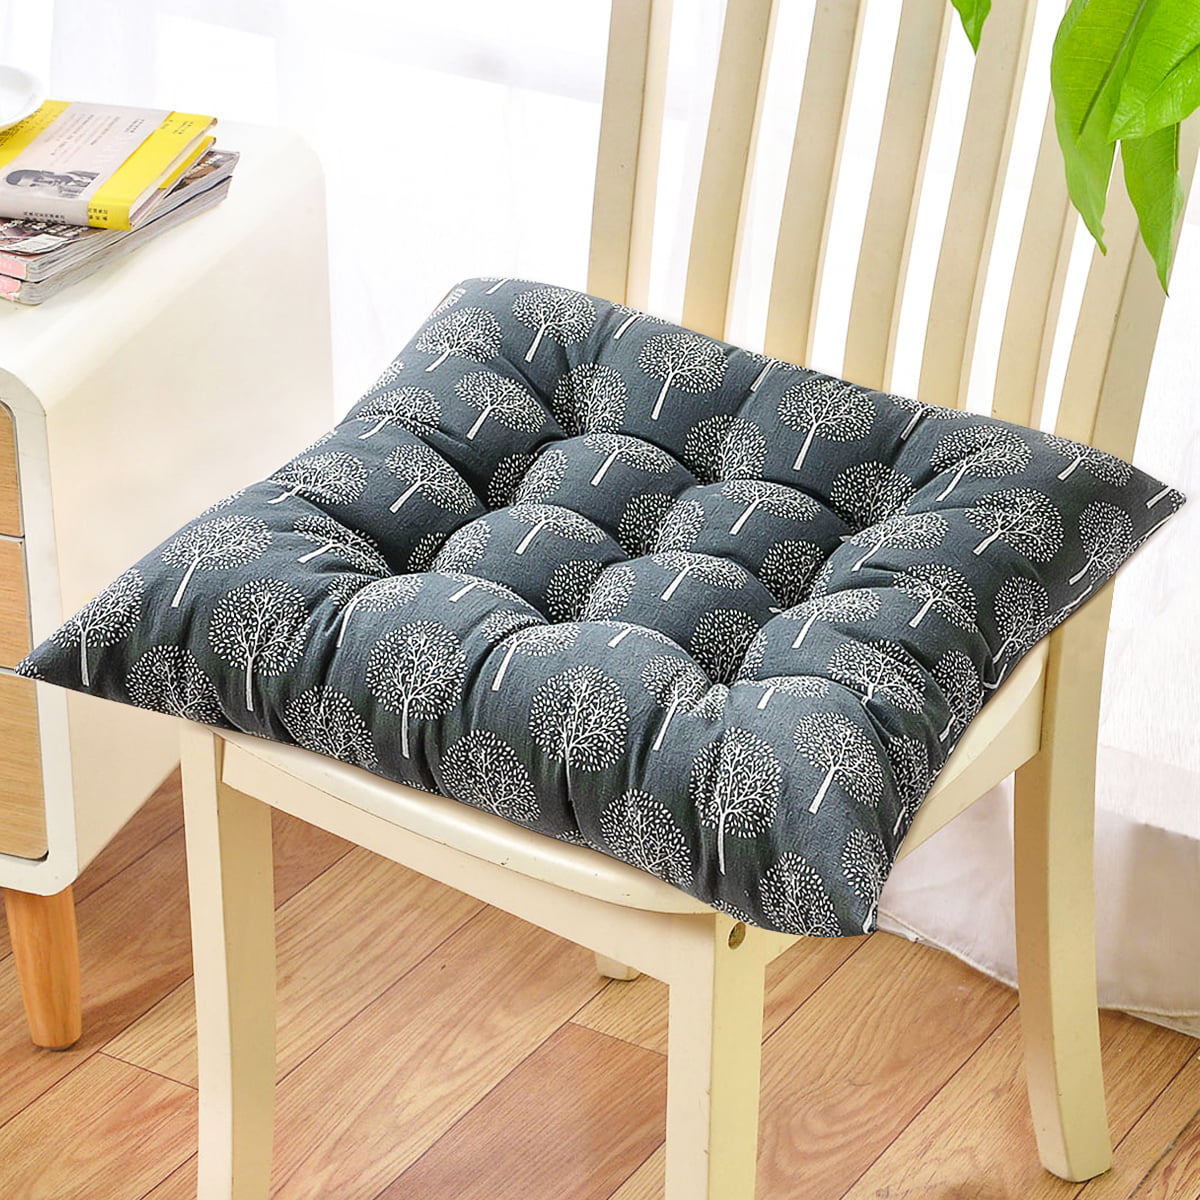 1/2/4X Soft Seat Pad Dining Room Kitchen Garden Tie On Chair Cushions Home Decor 